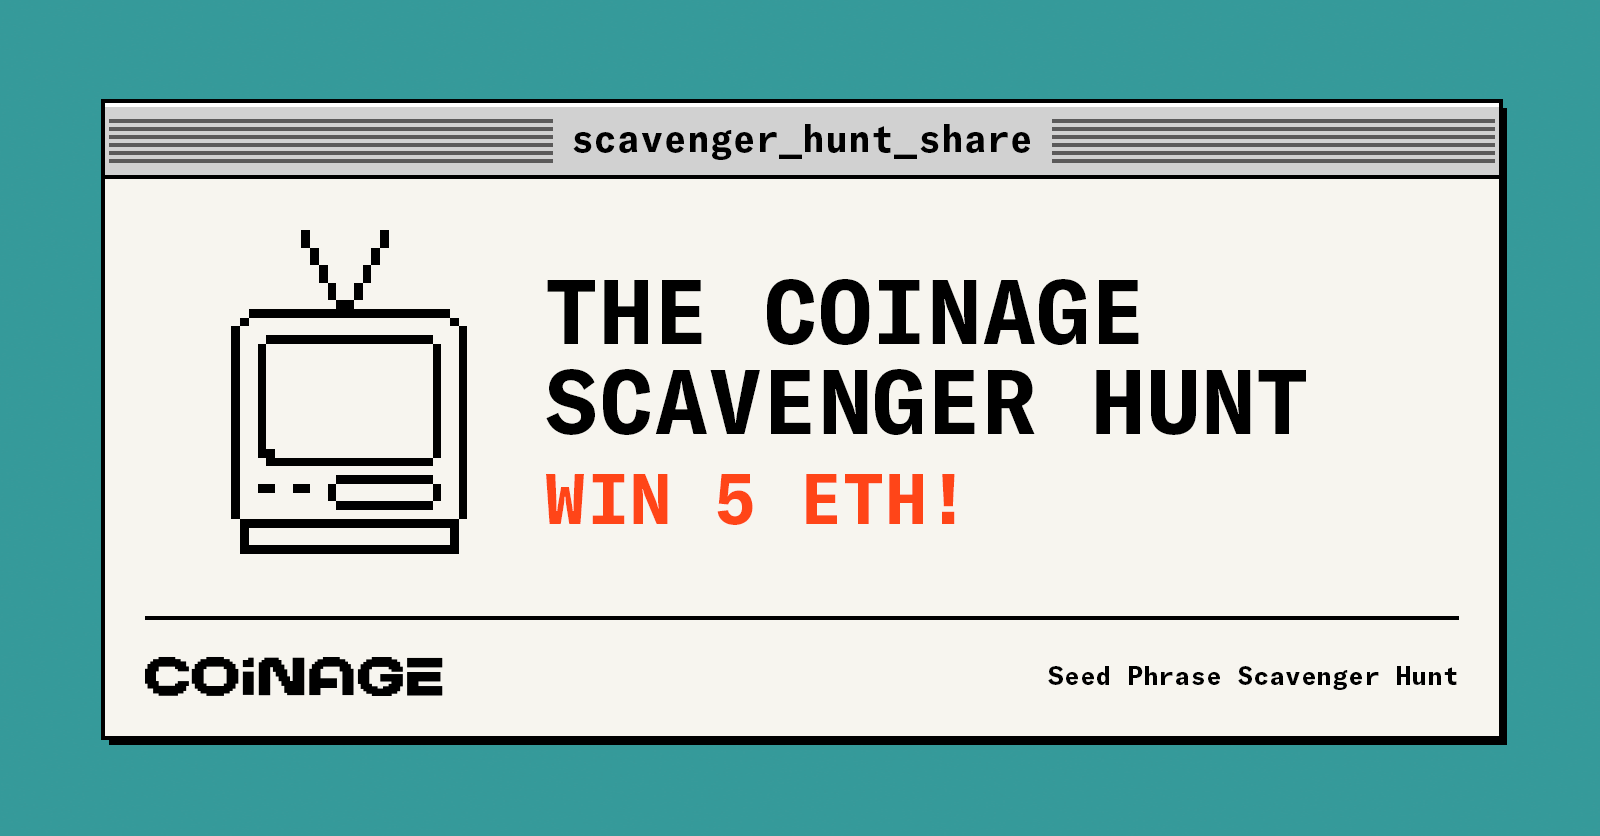 How to Build an Onchain Scavenger Hunt